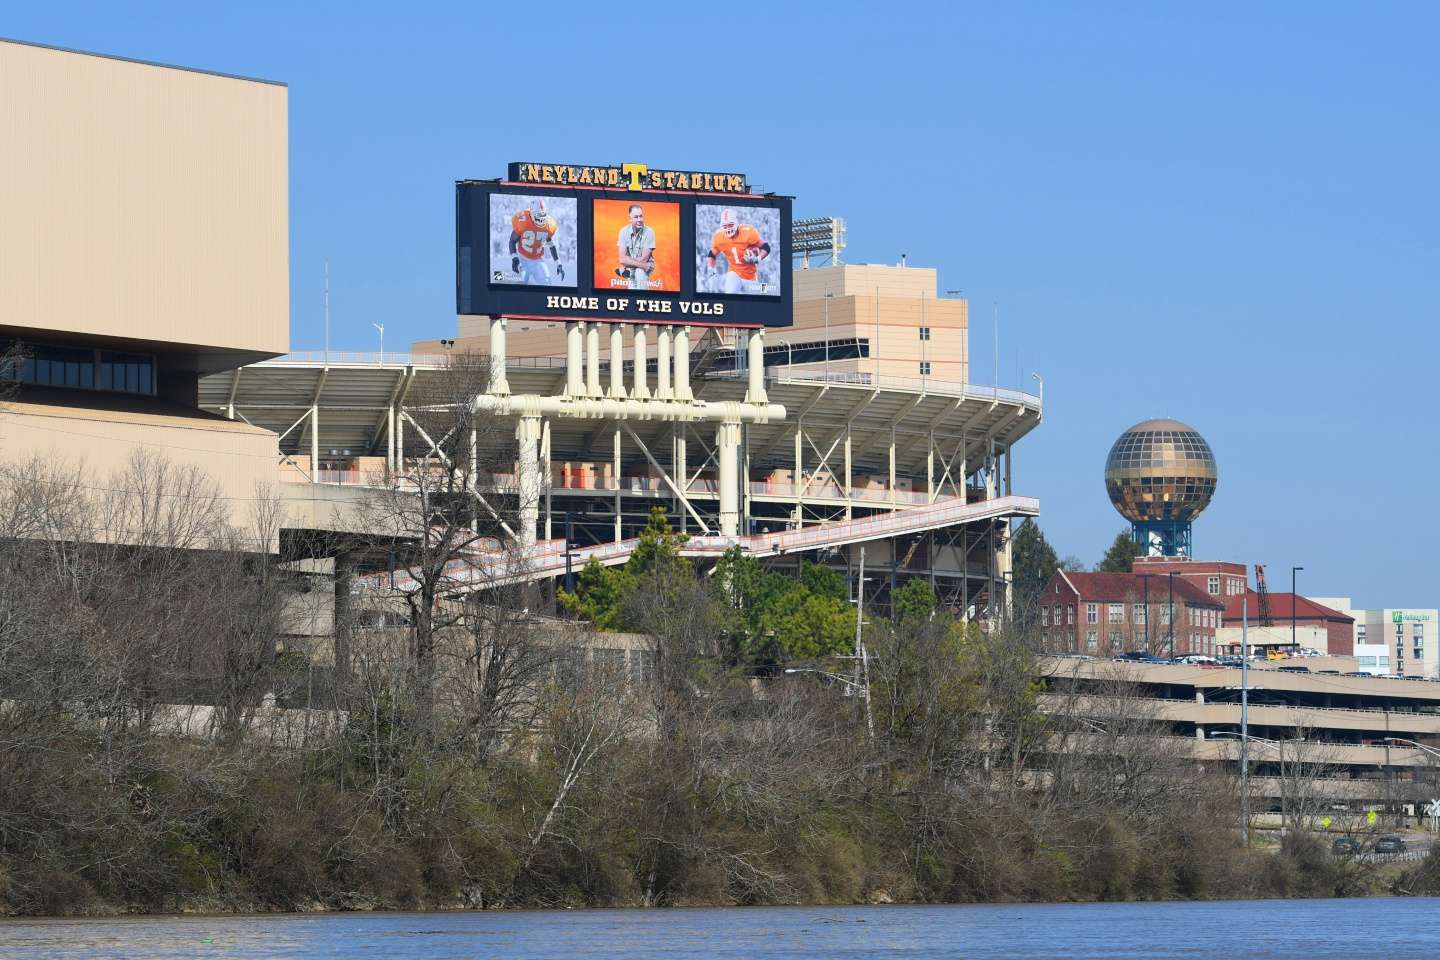 Adjacent to Thompson-Boling (visible at left) is Neyland Stadium, home field and venue for the Tennessee Vols football team. To the right is the Sunsphere built for the 1982 Worldâs Fair, which is now part of the newly renovated Worldâs Fair Exhibition Hall. It will host the Bassmaster Classic Outdoors Expo, which also includes the Knoxville Convention Center. 